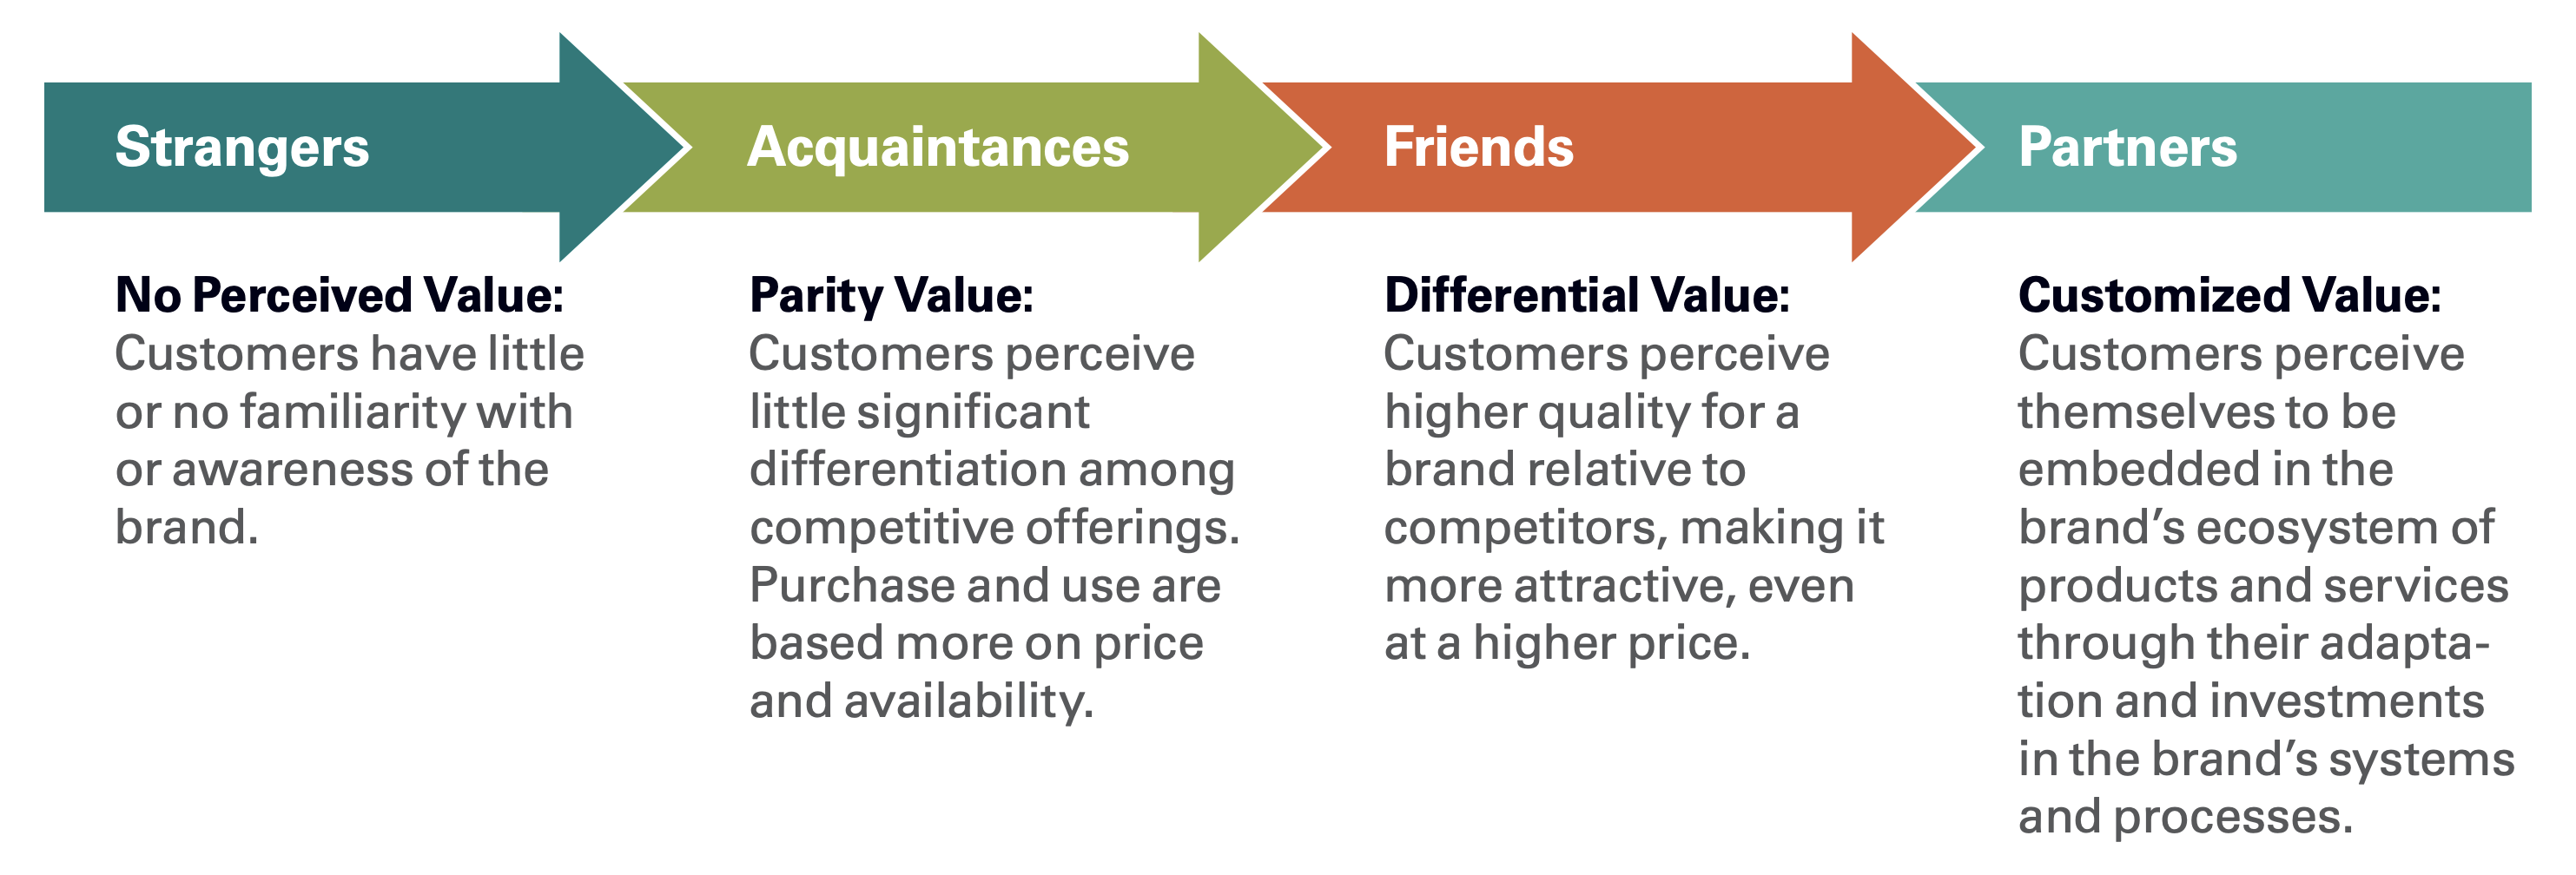 Different Relationships, Different Brand Value Propositions